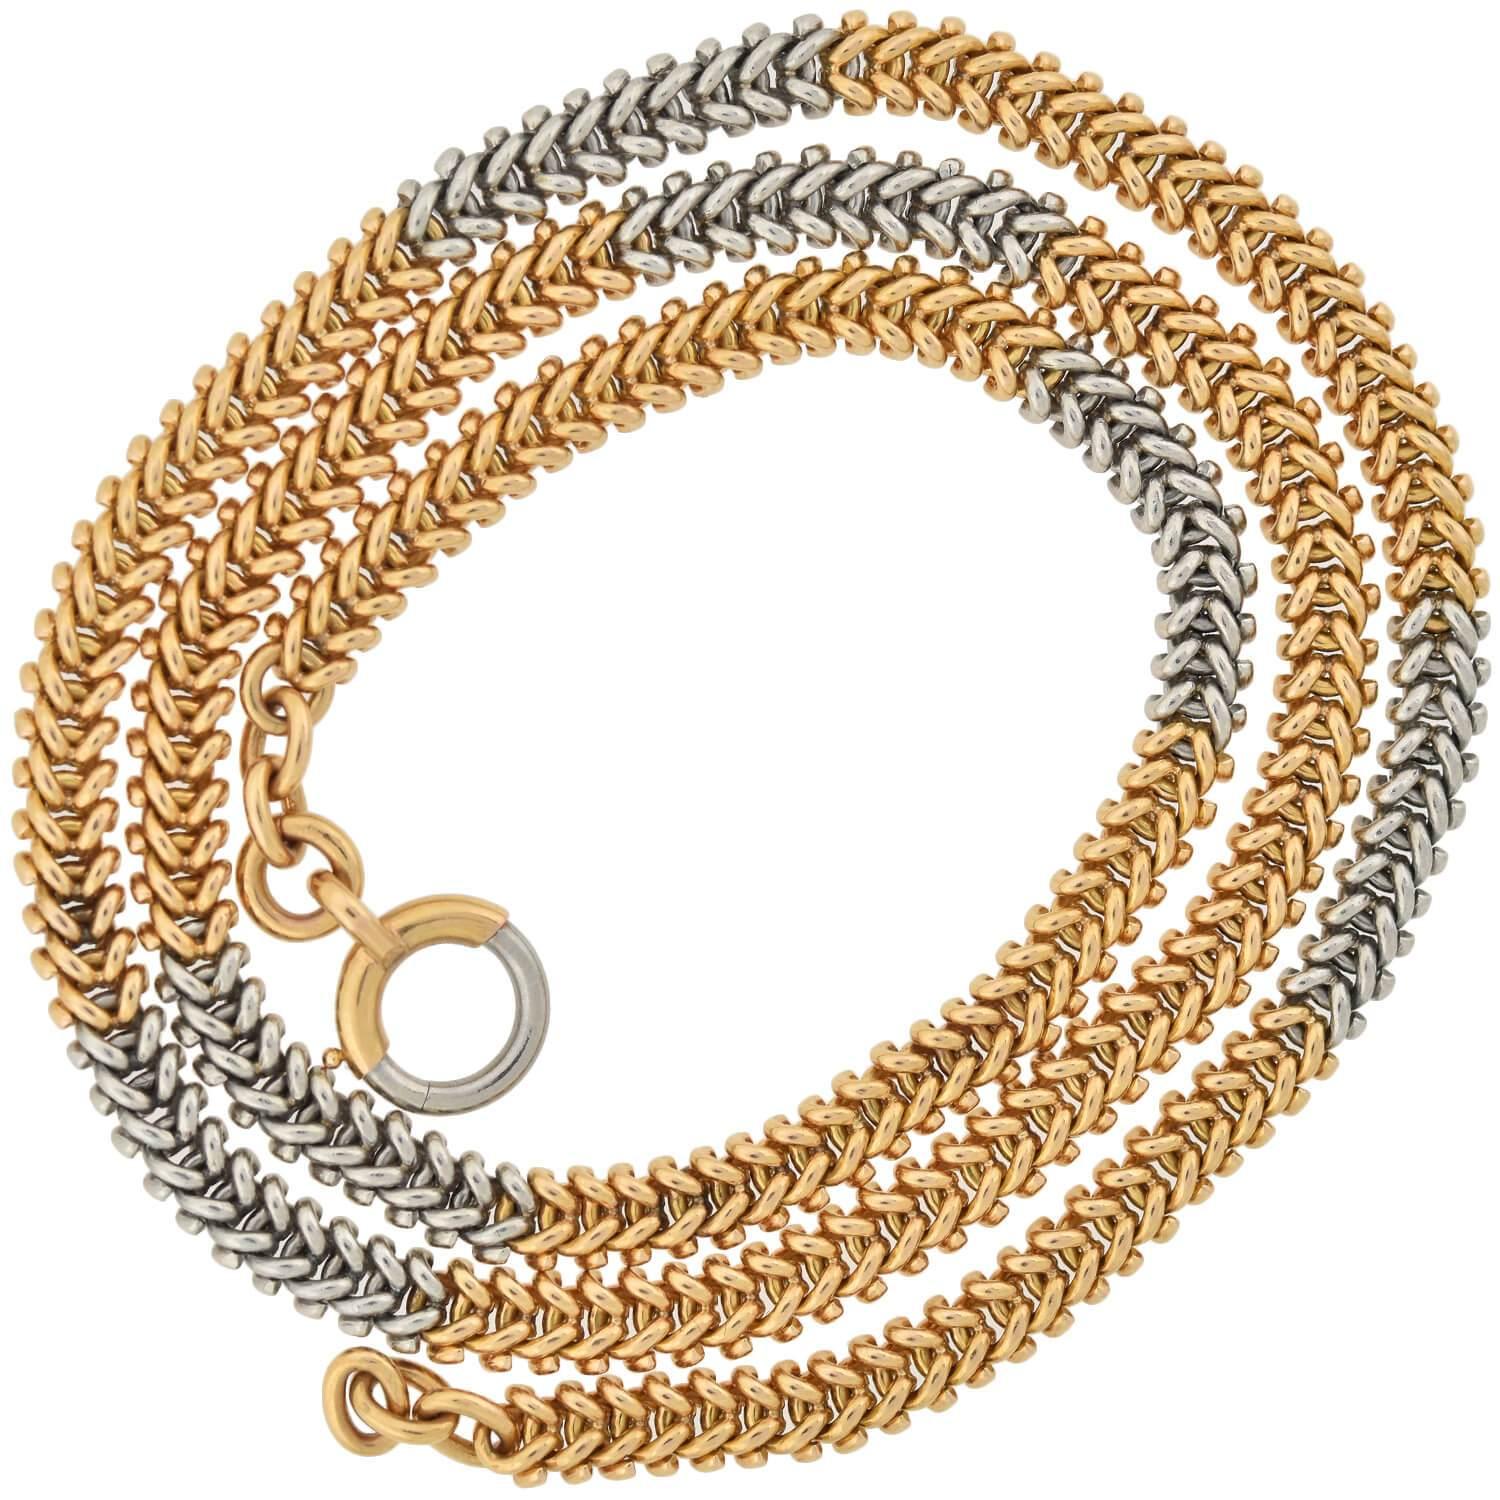 An exquisite French-made mixed metals chain from the Edwardian (ca1910s) era! This beautiful, weighty piece features a pattern of 18kt rose gold chain that alternates with sections of gleaming platinum links to create a wonderful two-tone appeal.